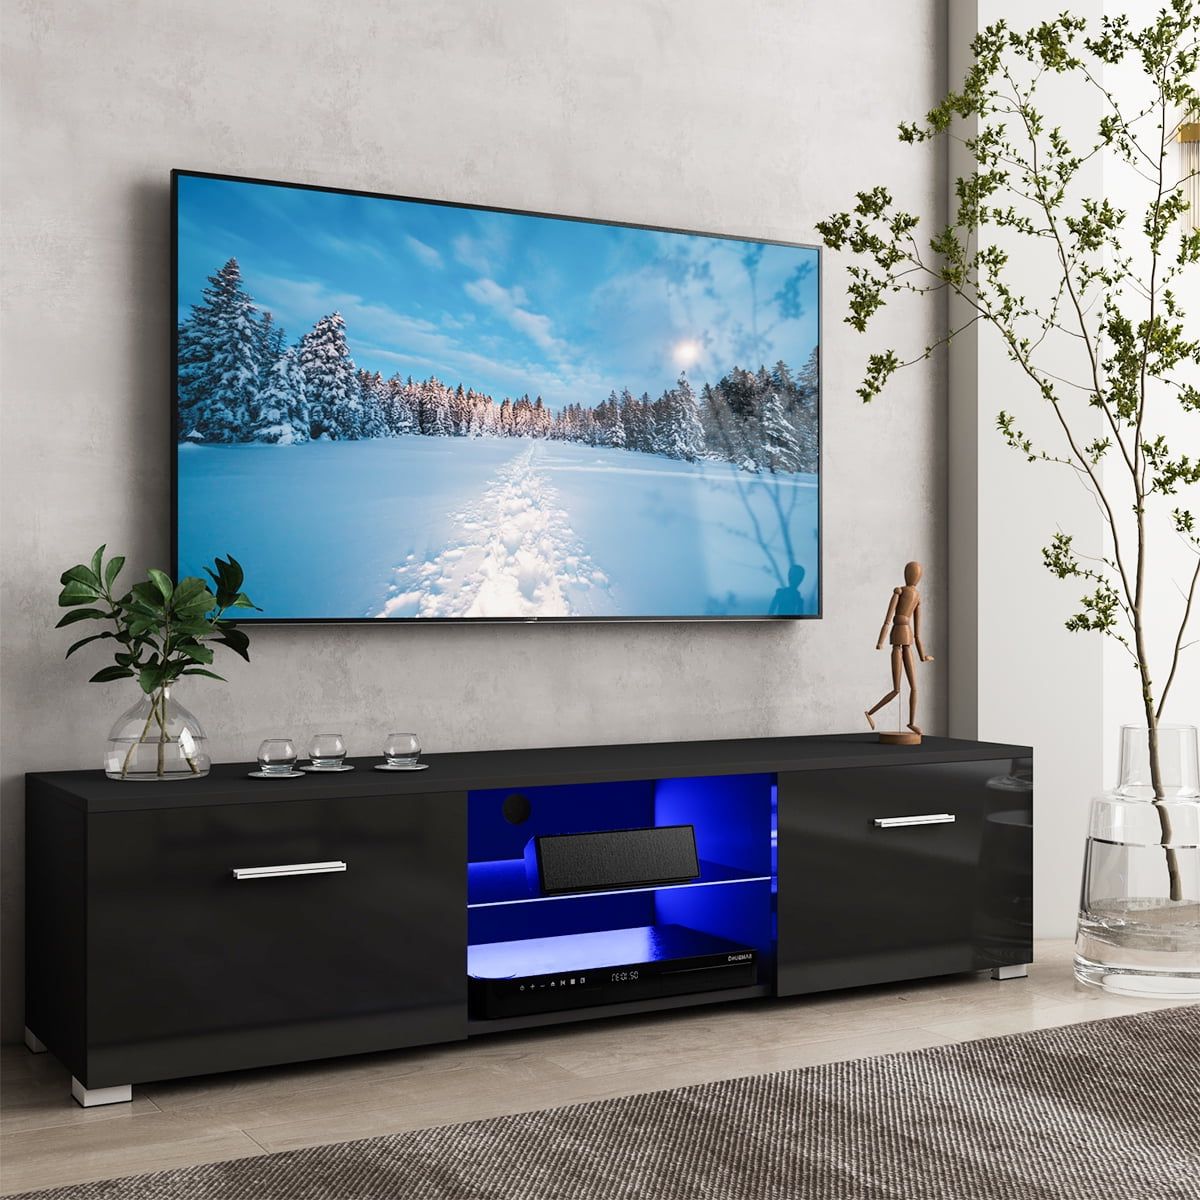 Modern Entertainment Center With Rgb Led Lights For Italy | Ubuy Pertaining To Rgb Tv Entertainment Centers (Gallery 7 of 20)